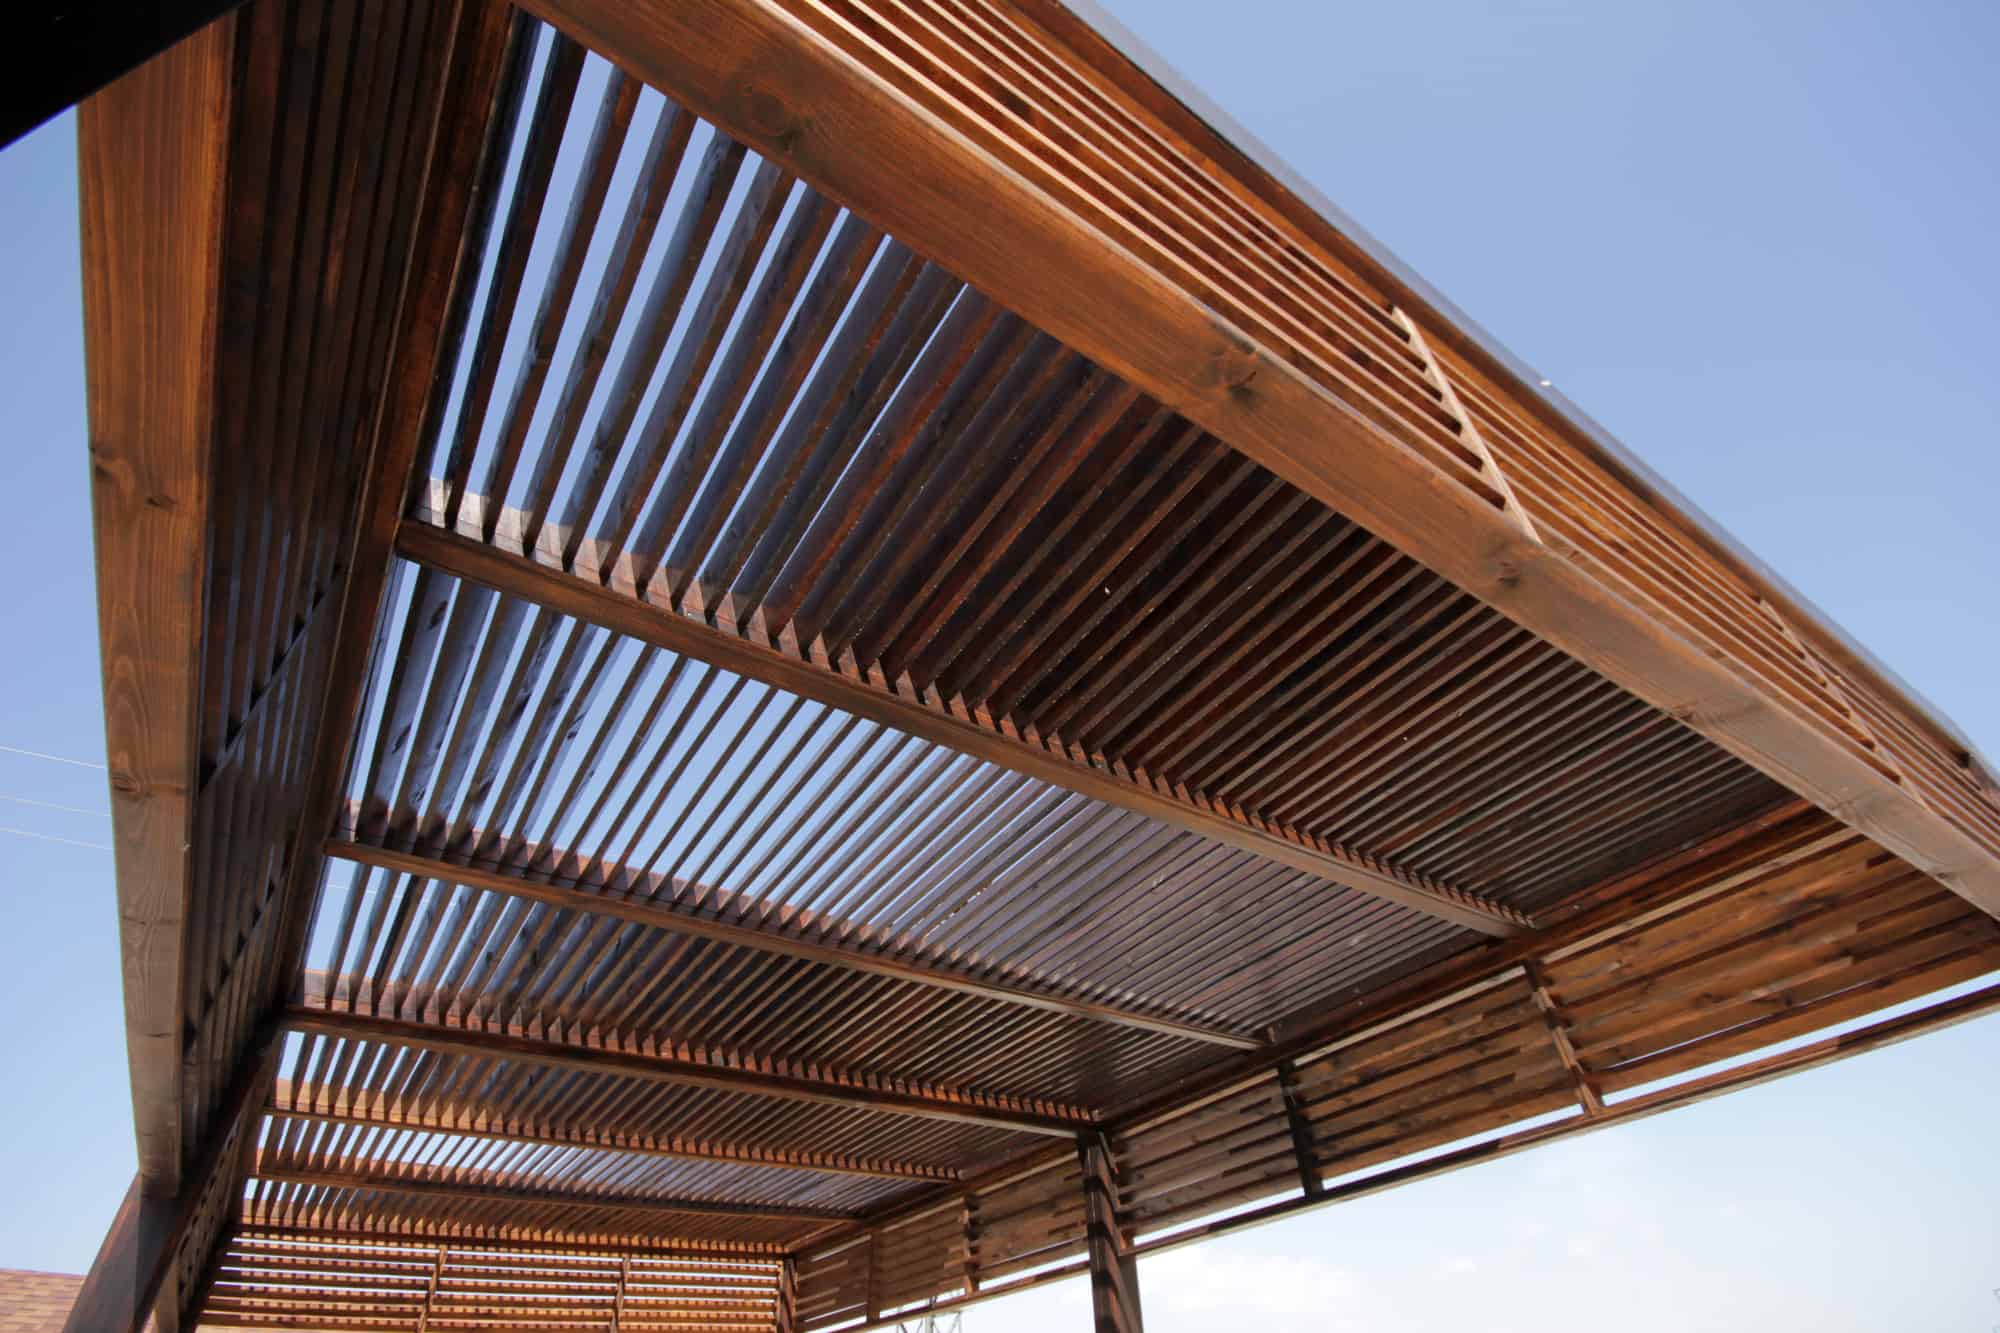 Wooden ergola with ceiling in backyard